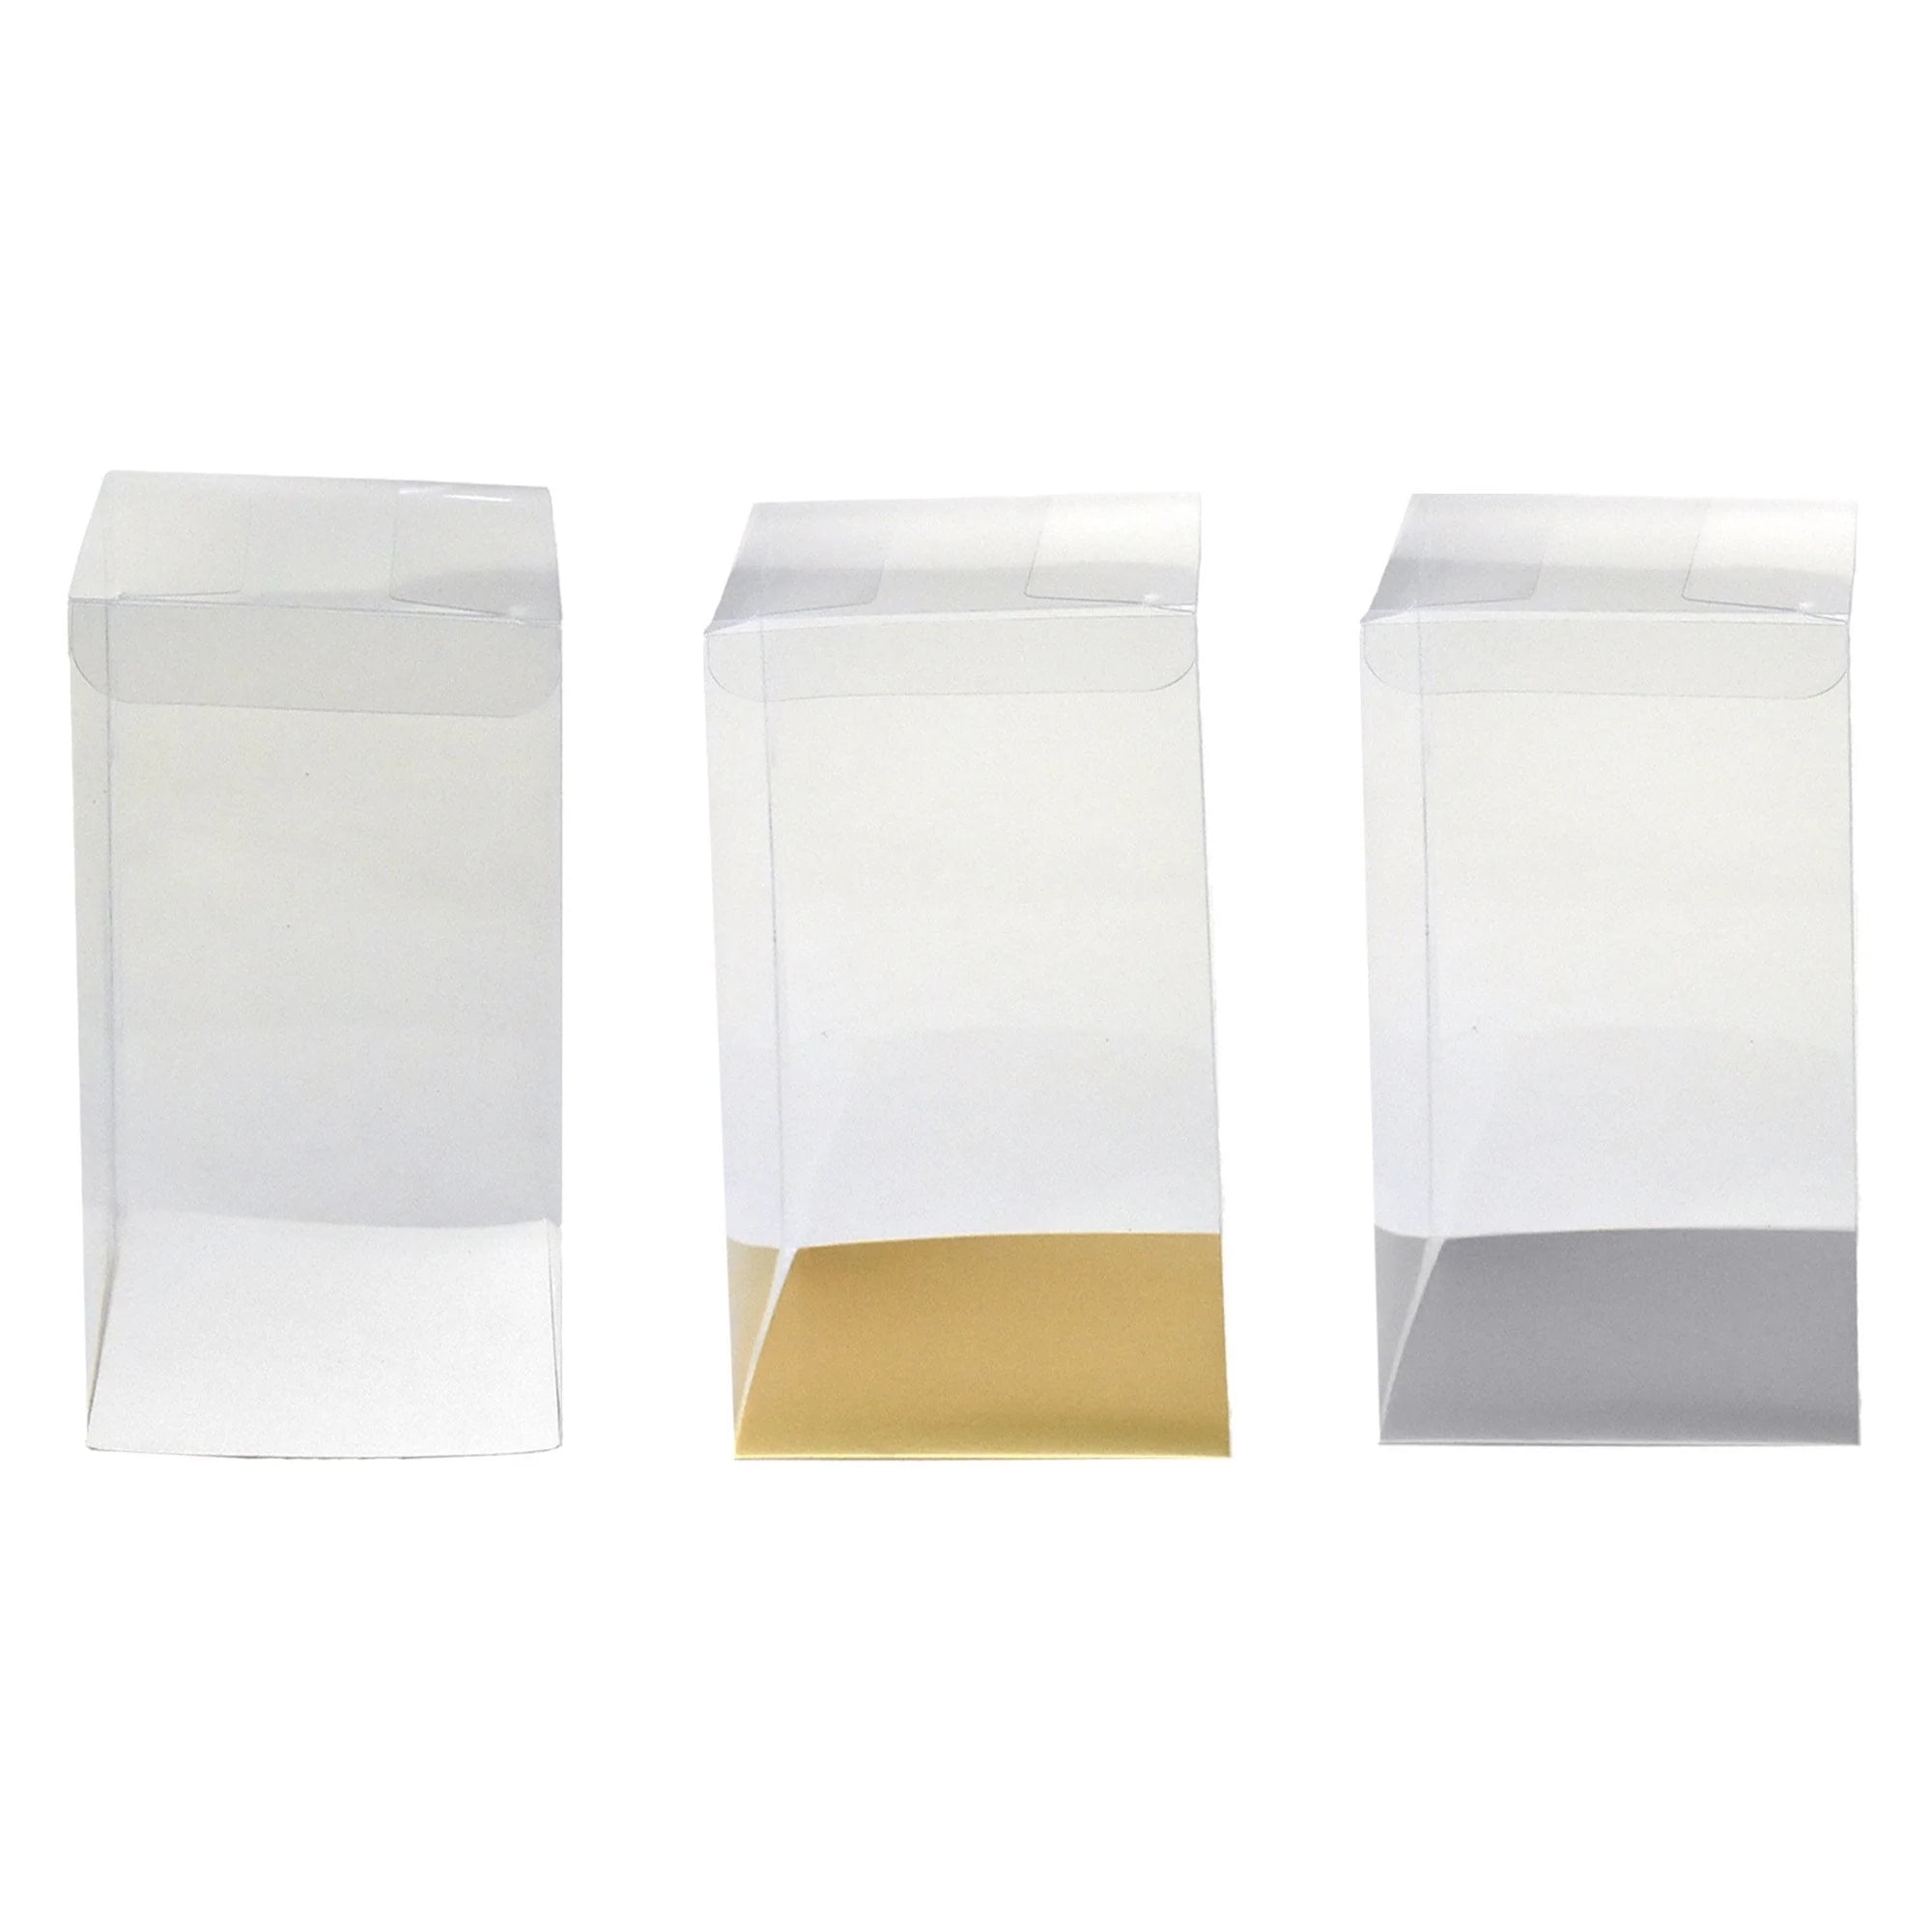 Clear Plastic Parts Display Case with 15 Pieces 3/4 x 3/4 inch Boxes | Esslinger